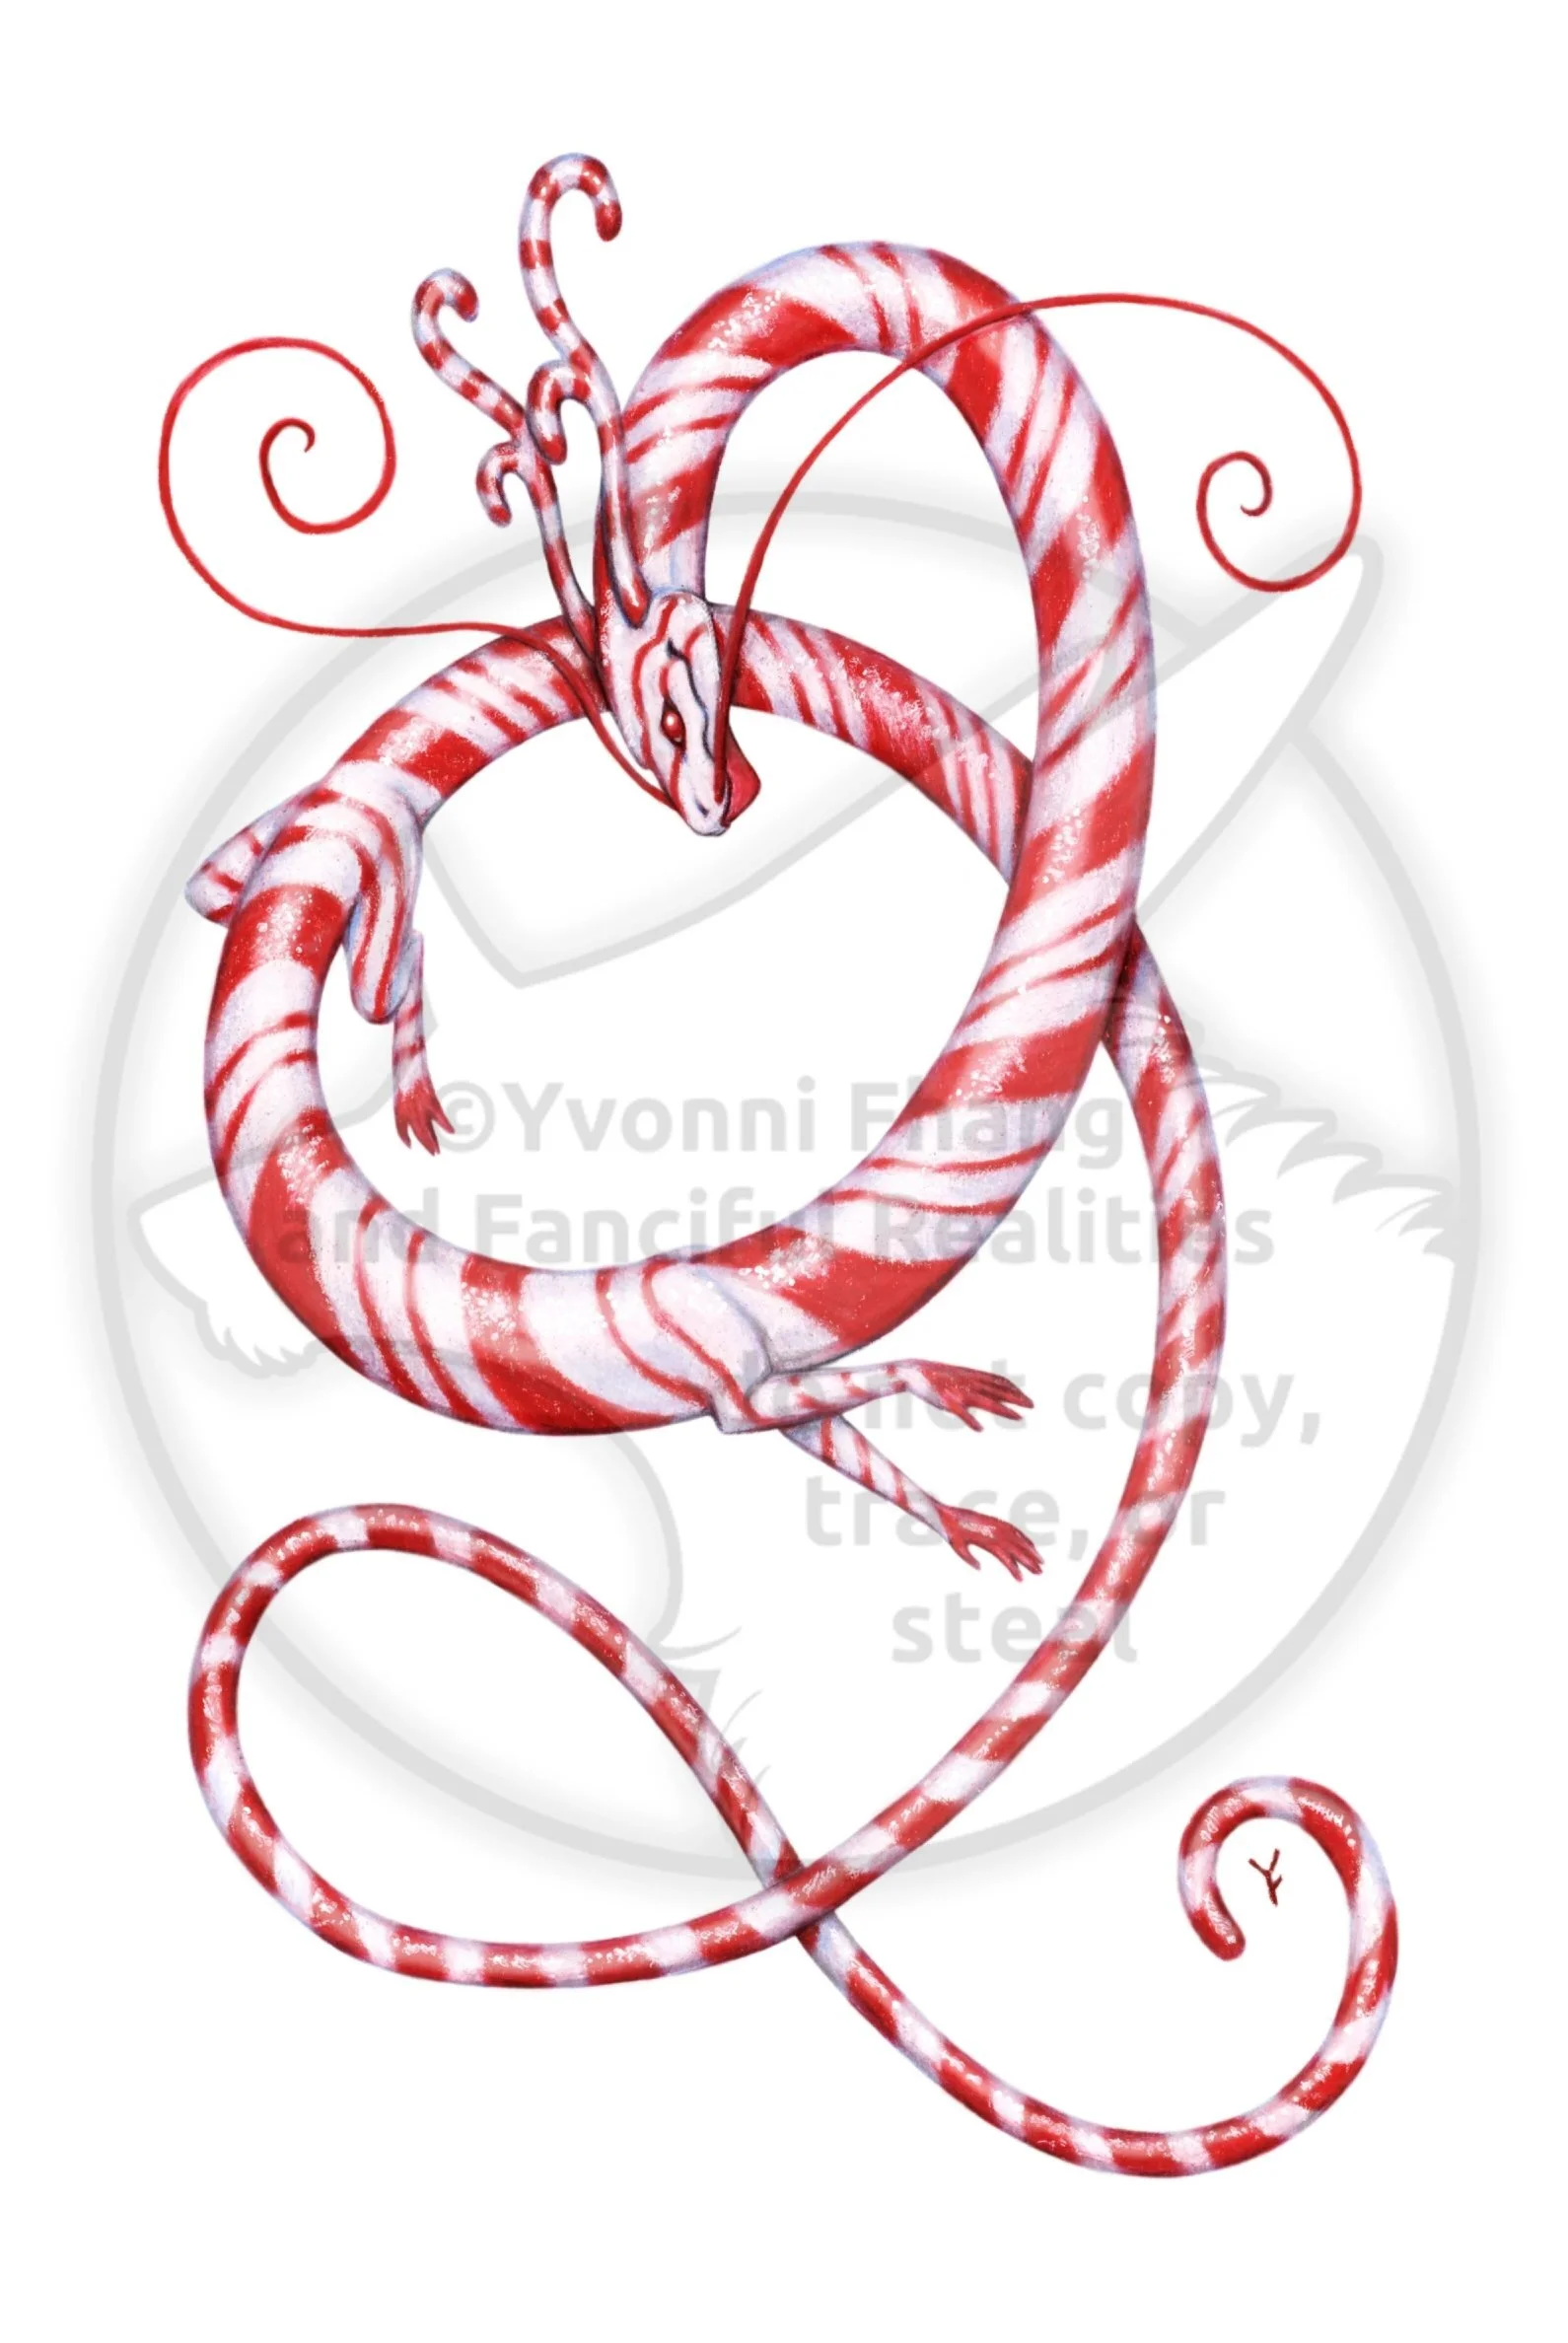 A holiday hybrid, an Eastern dragon and a Christmas candy cane.